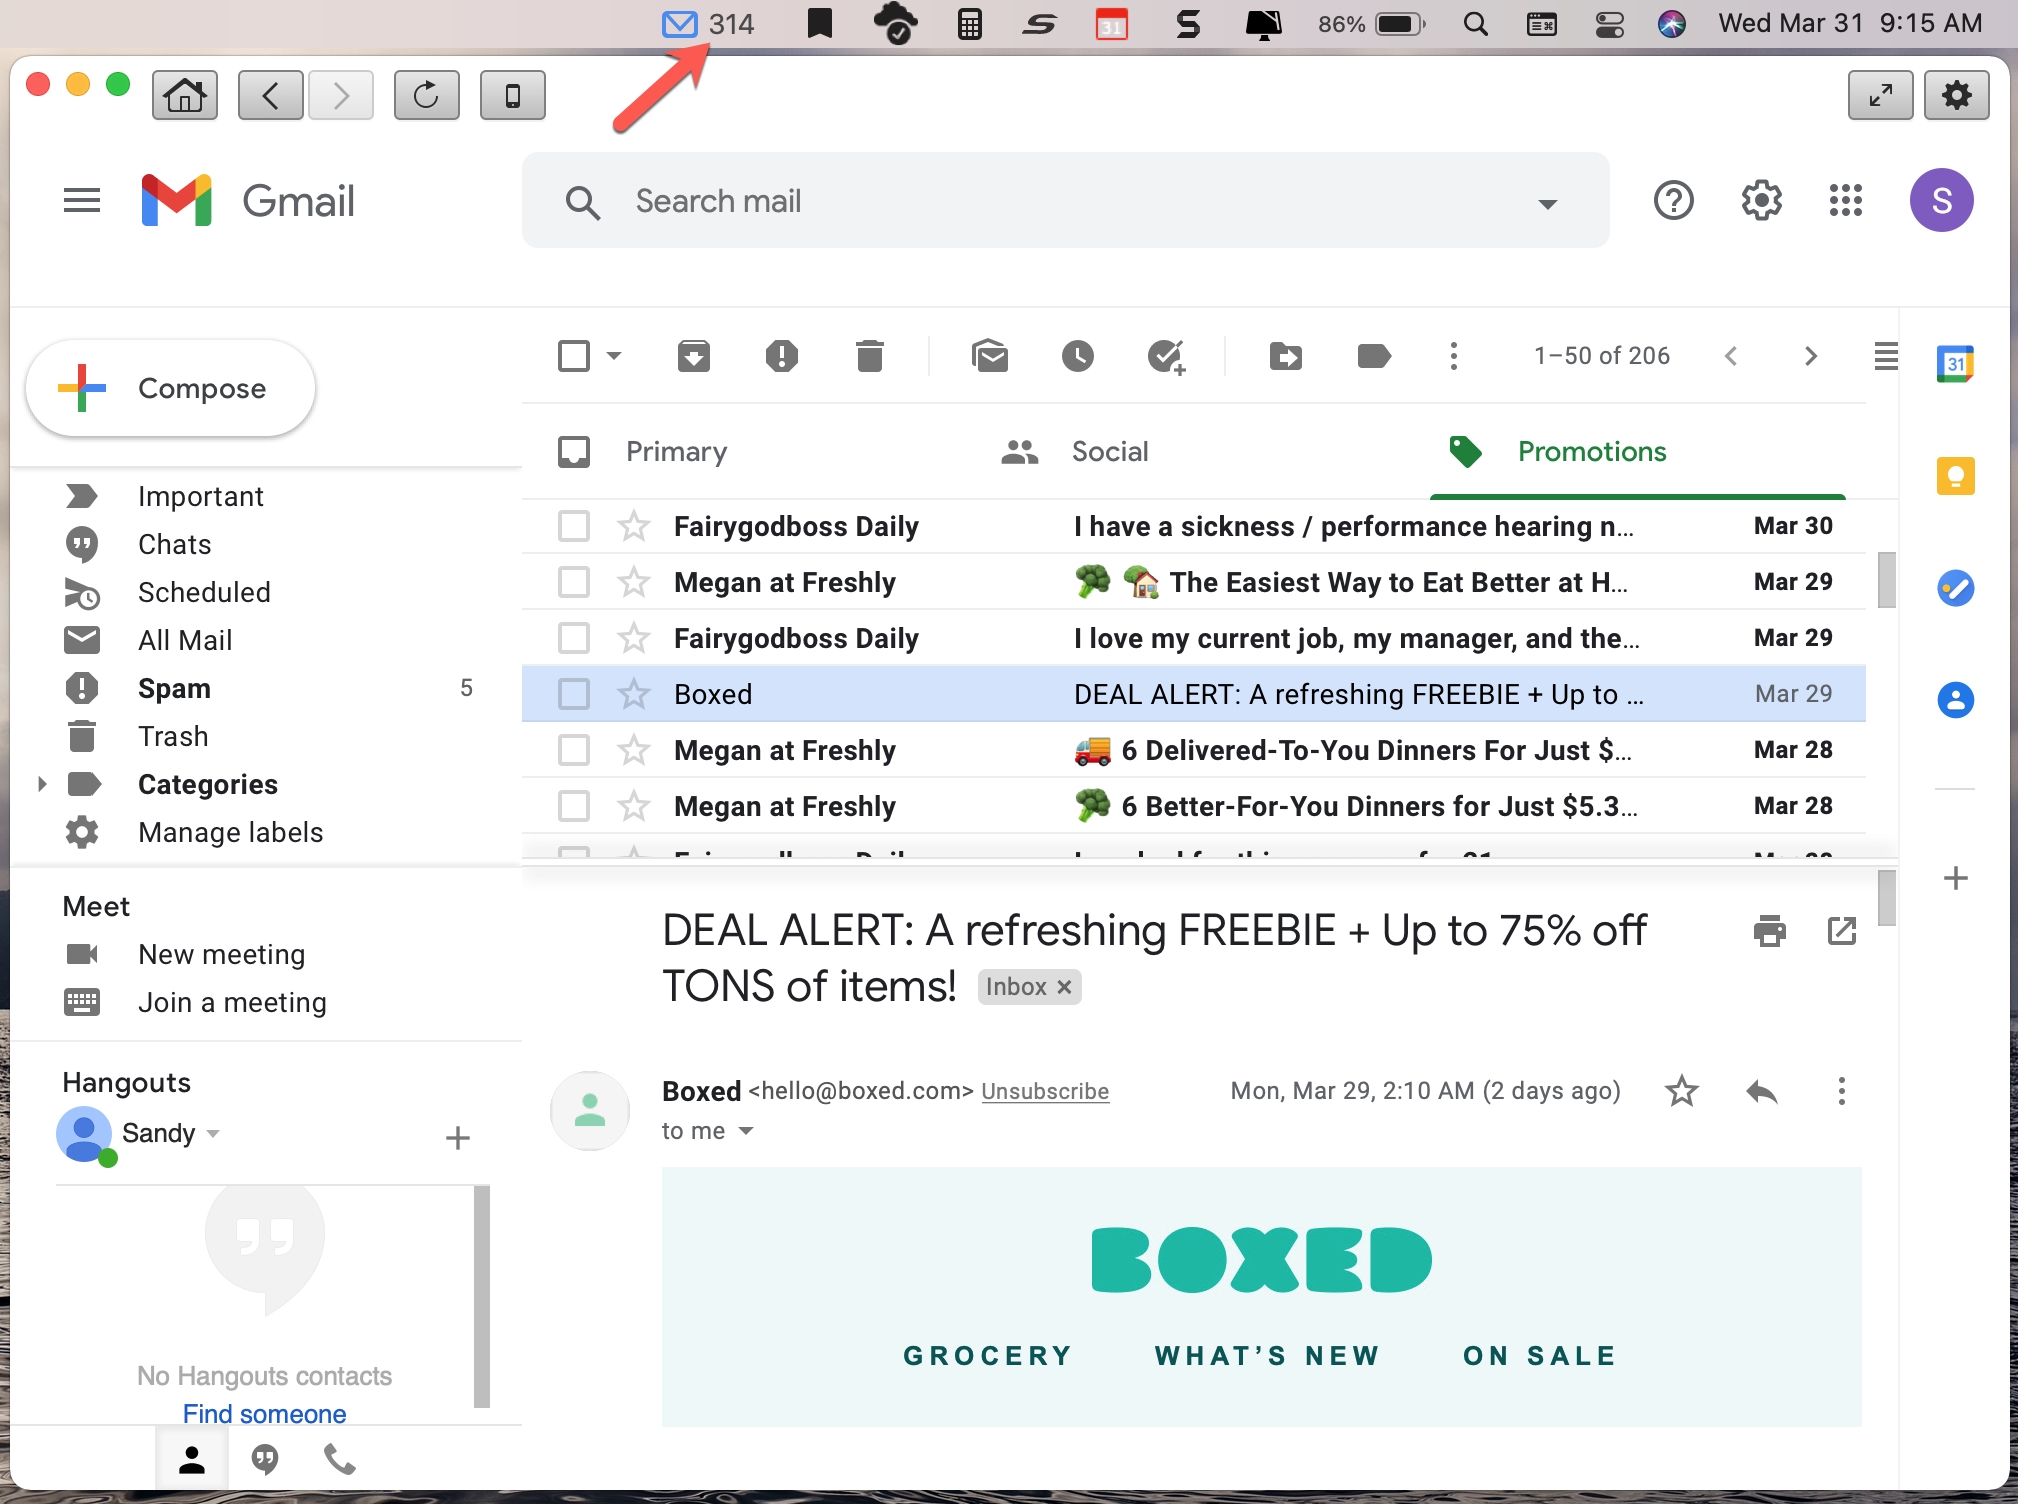 Go for Gmail Email App on Mac